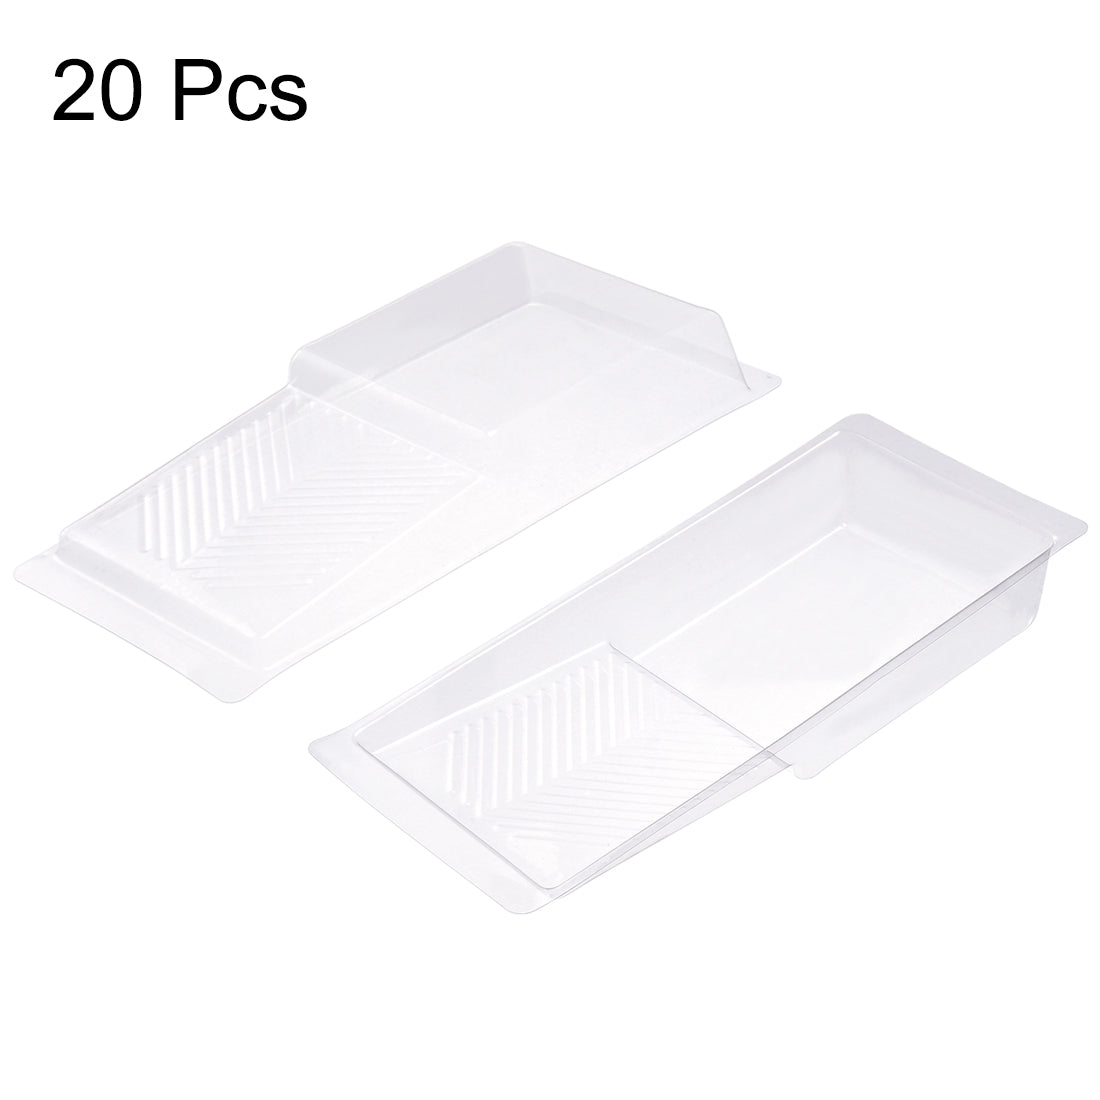 uxcell Uxcell 4 Inch Paint Roller Tray, Material PP Built for 4-Inch Roller Brushes 20pcs